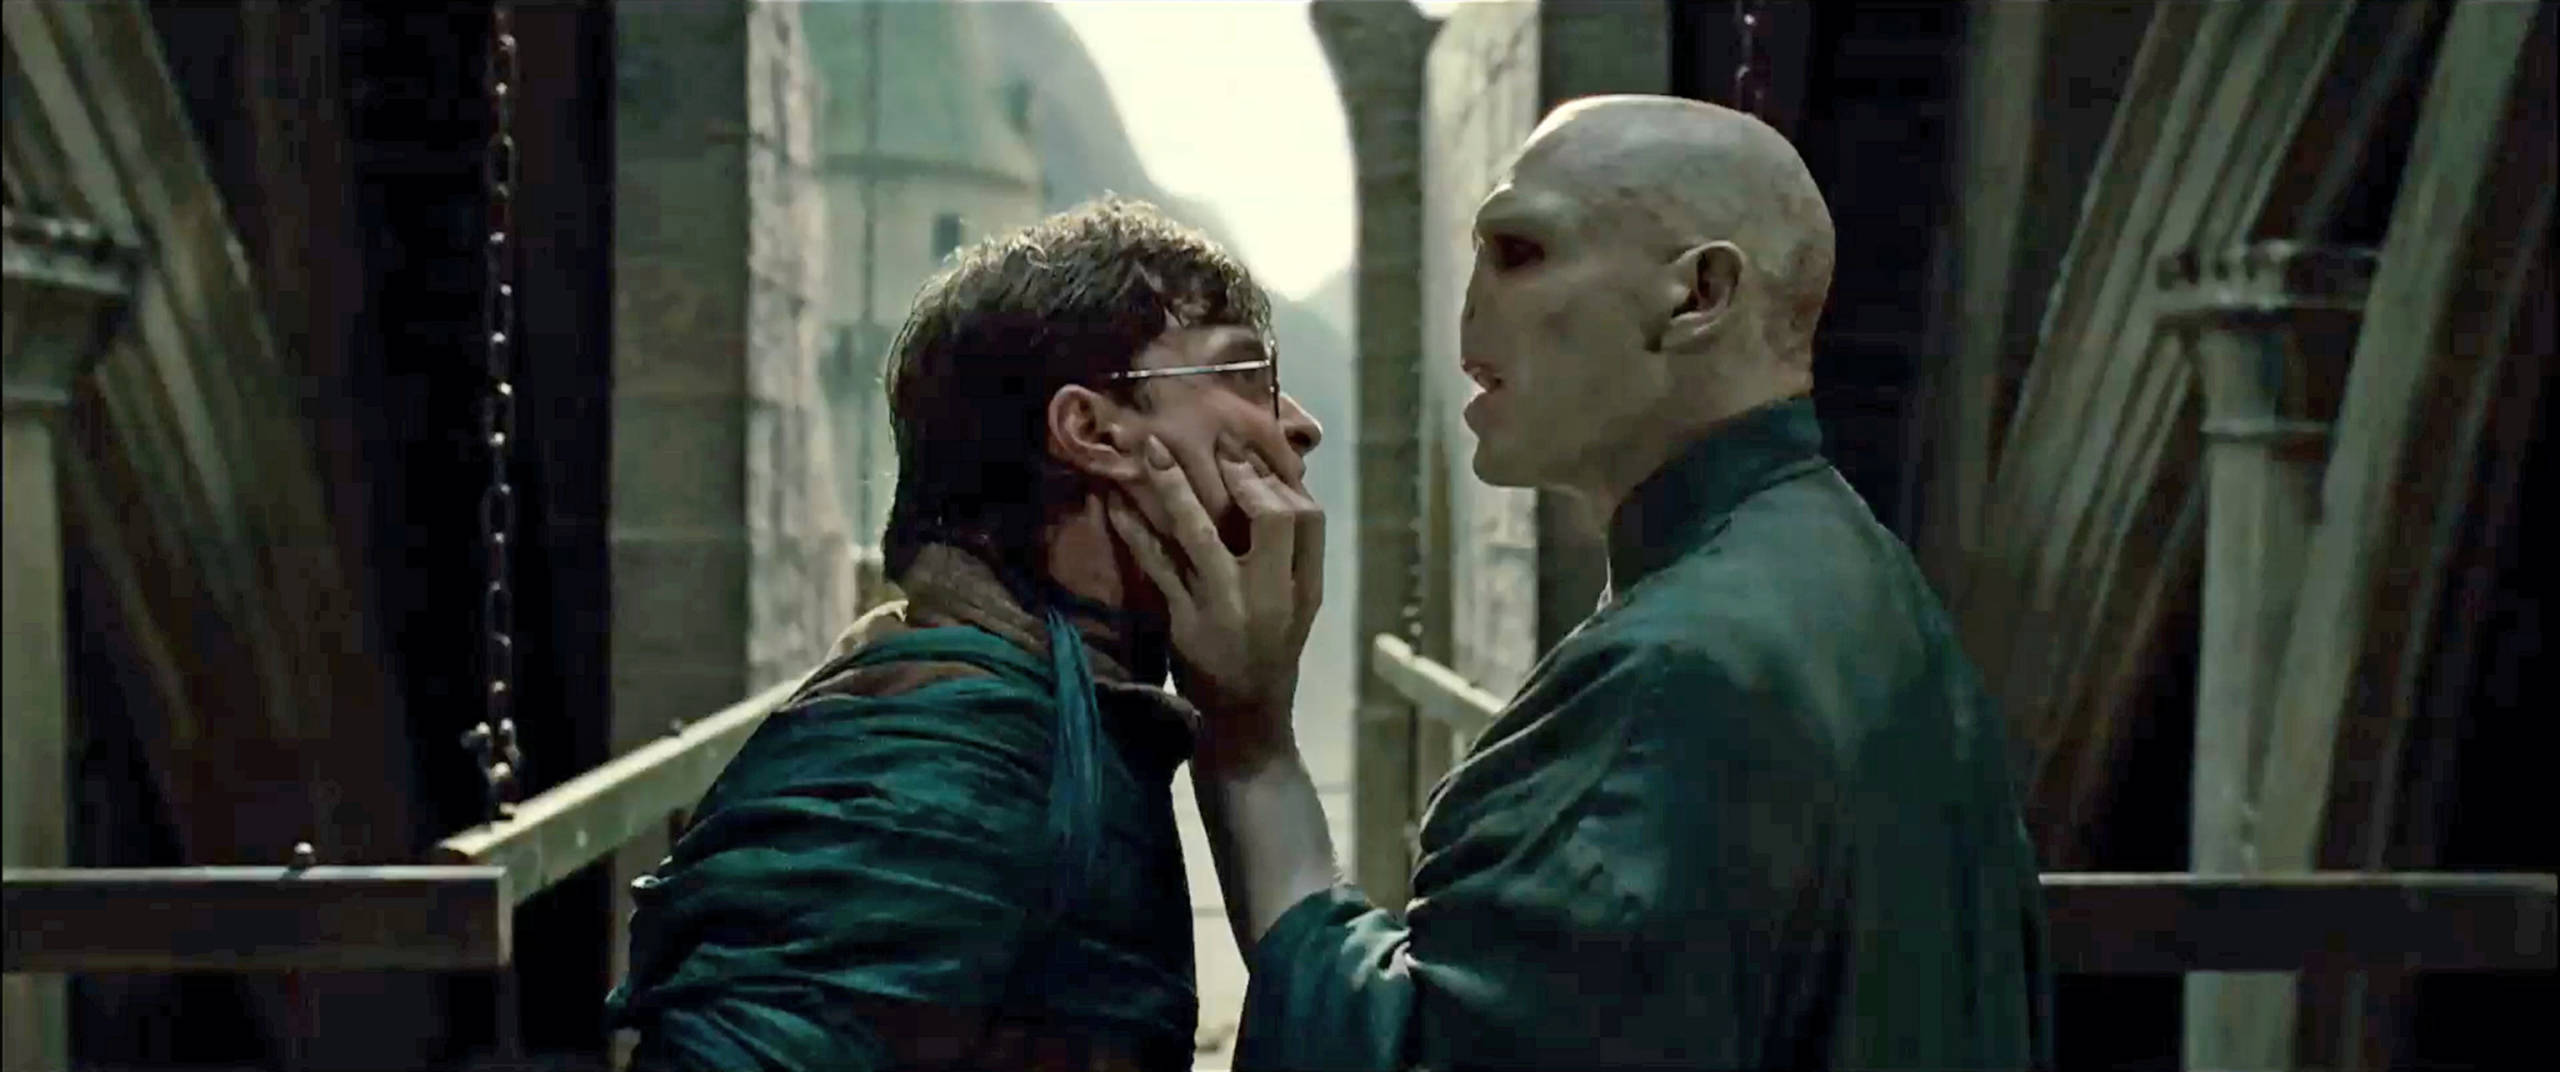 Voldemort grabbing Harry's face in the Deathly Hallows part 2